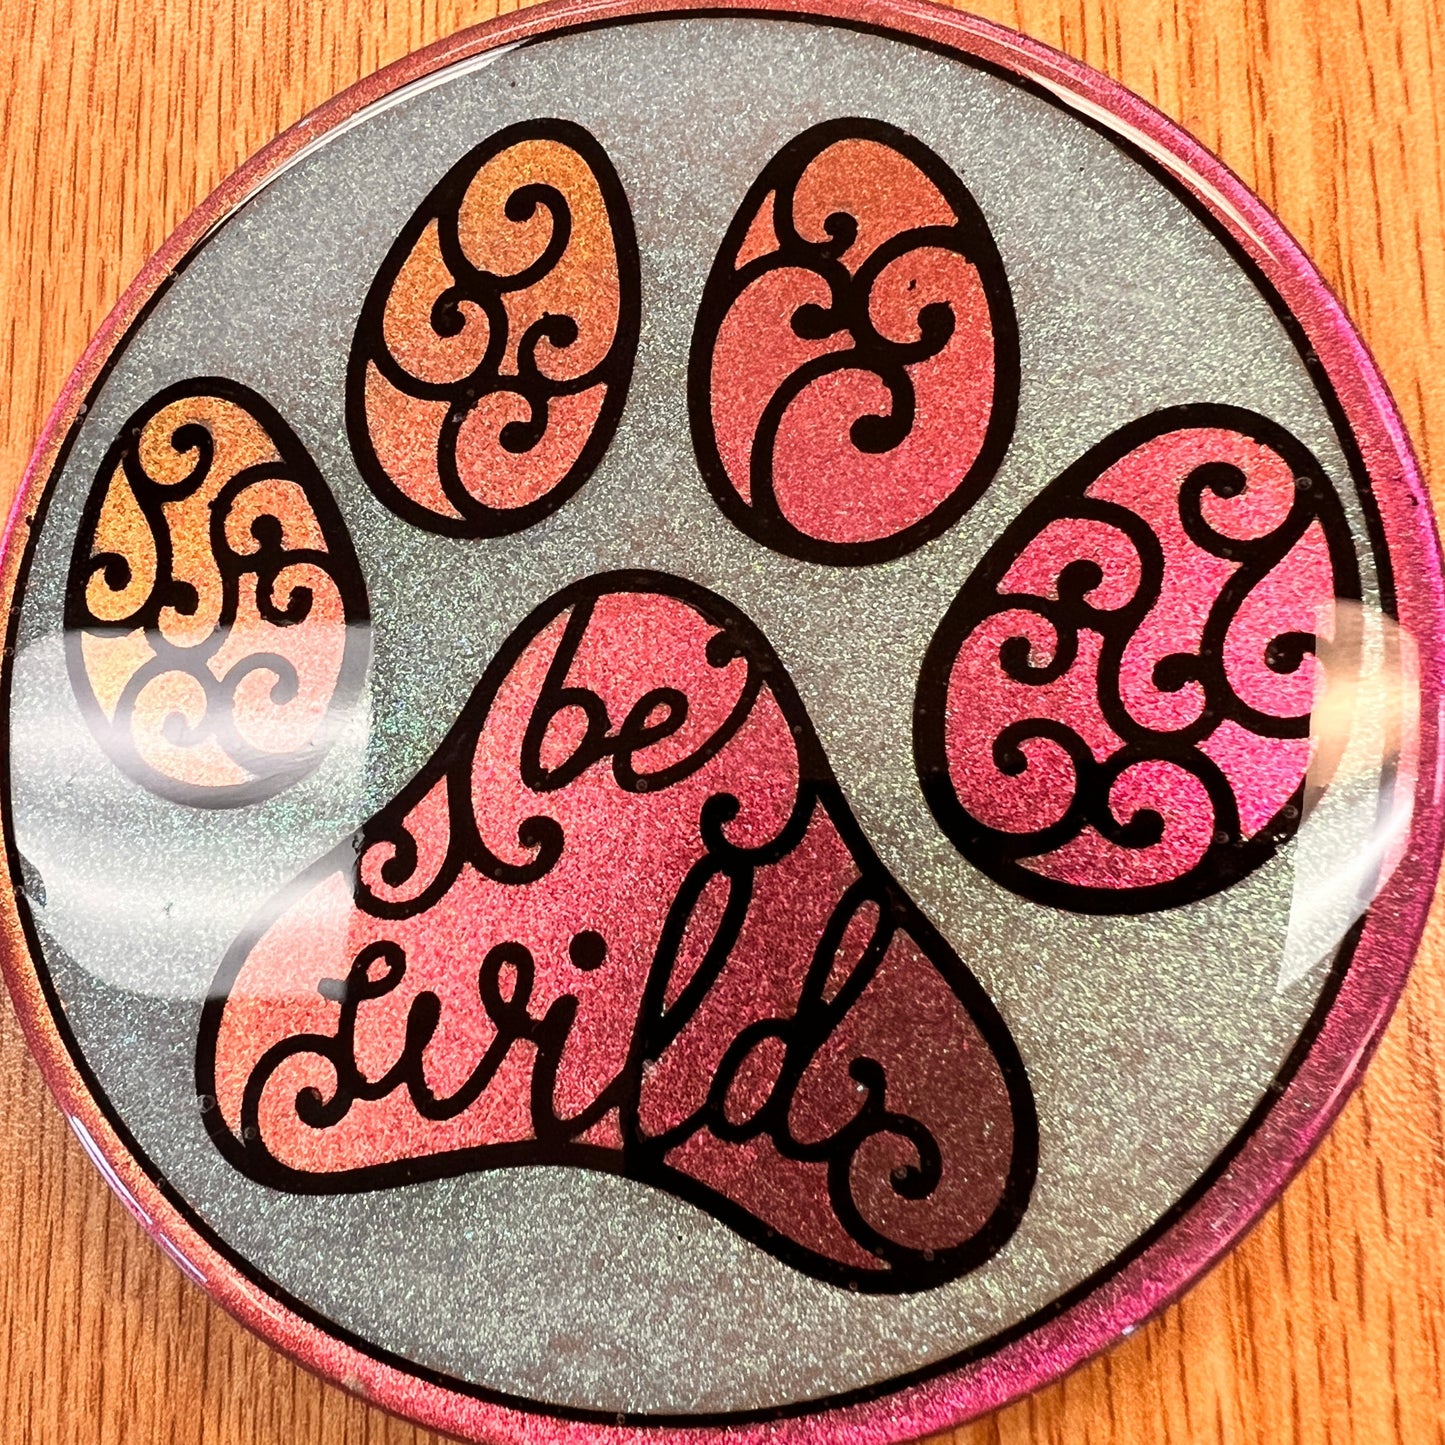 Discontinued - LG "Be Wild" Paw Print Coaster Silicone Mold